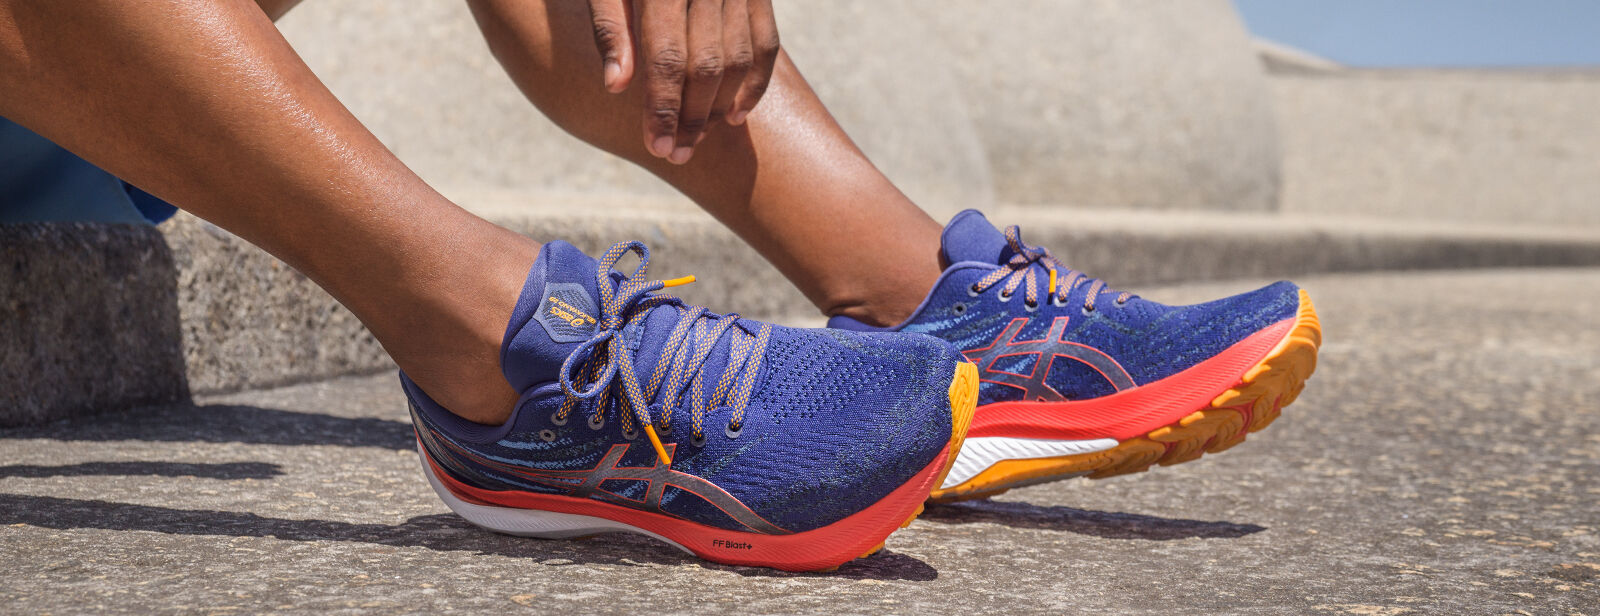 What Is The Widest Asics Shoes?